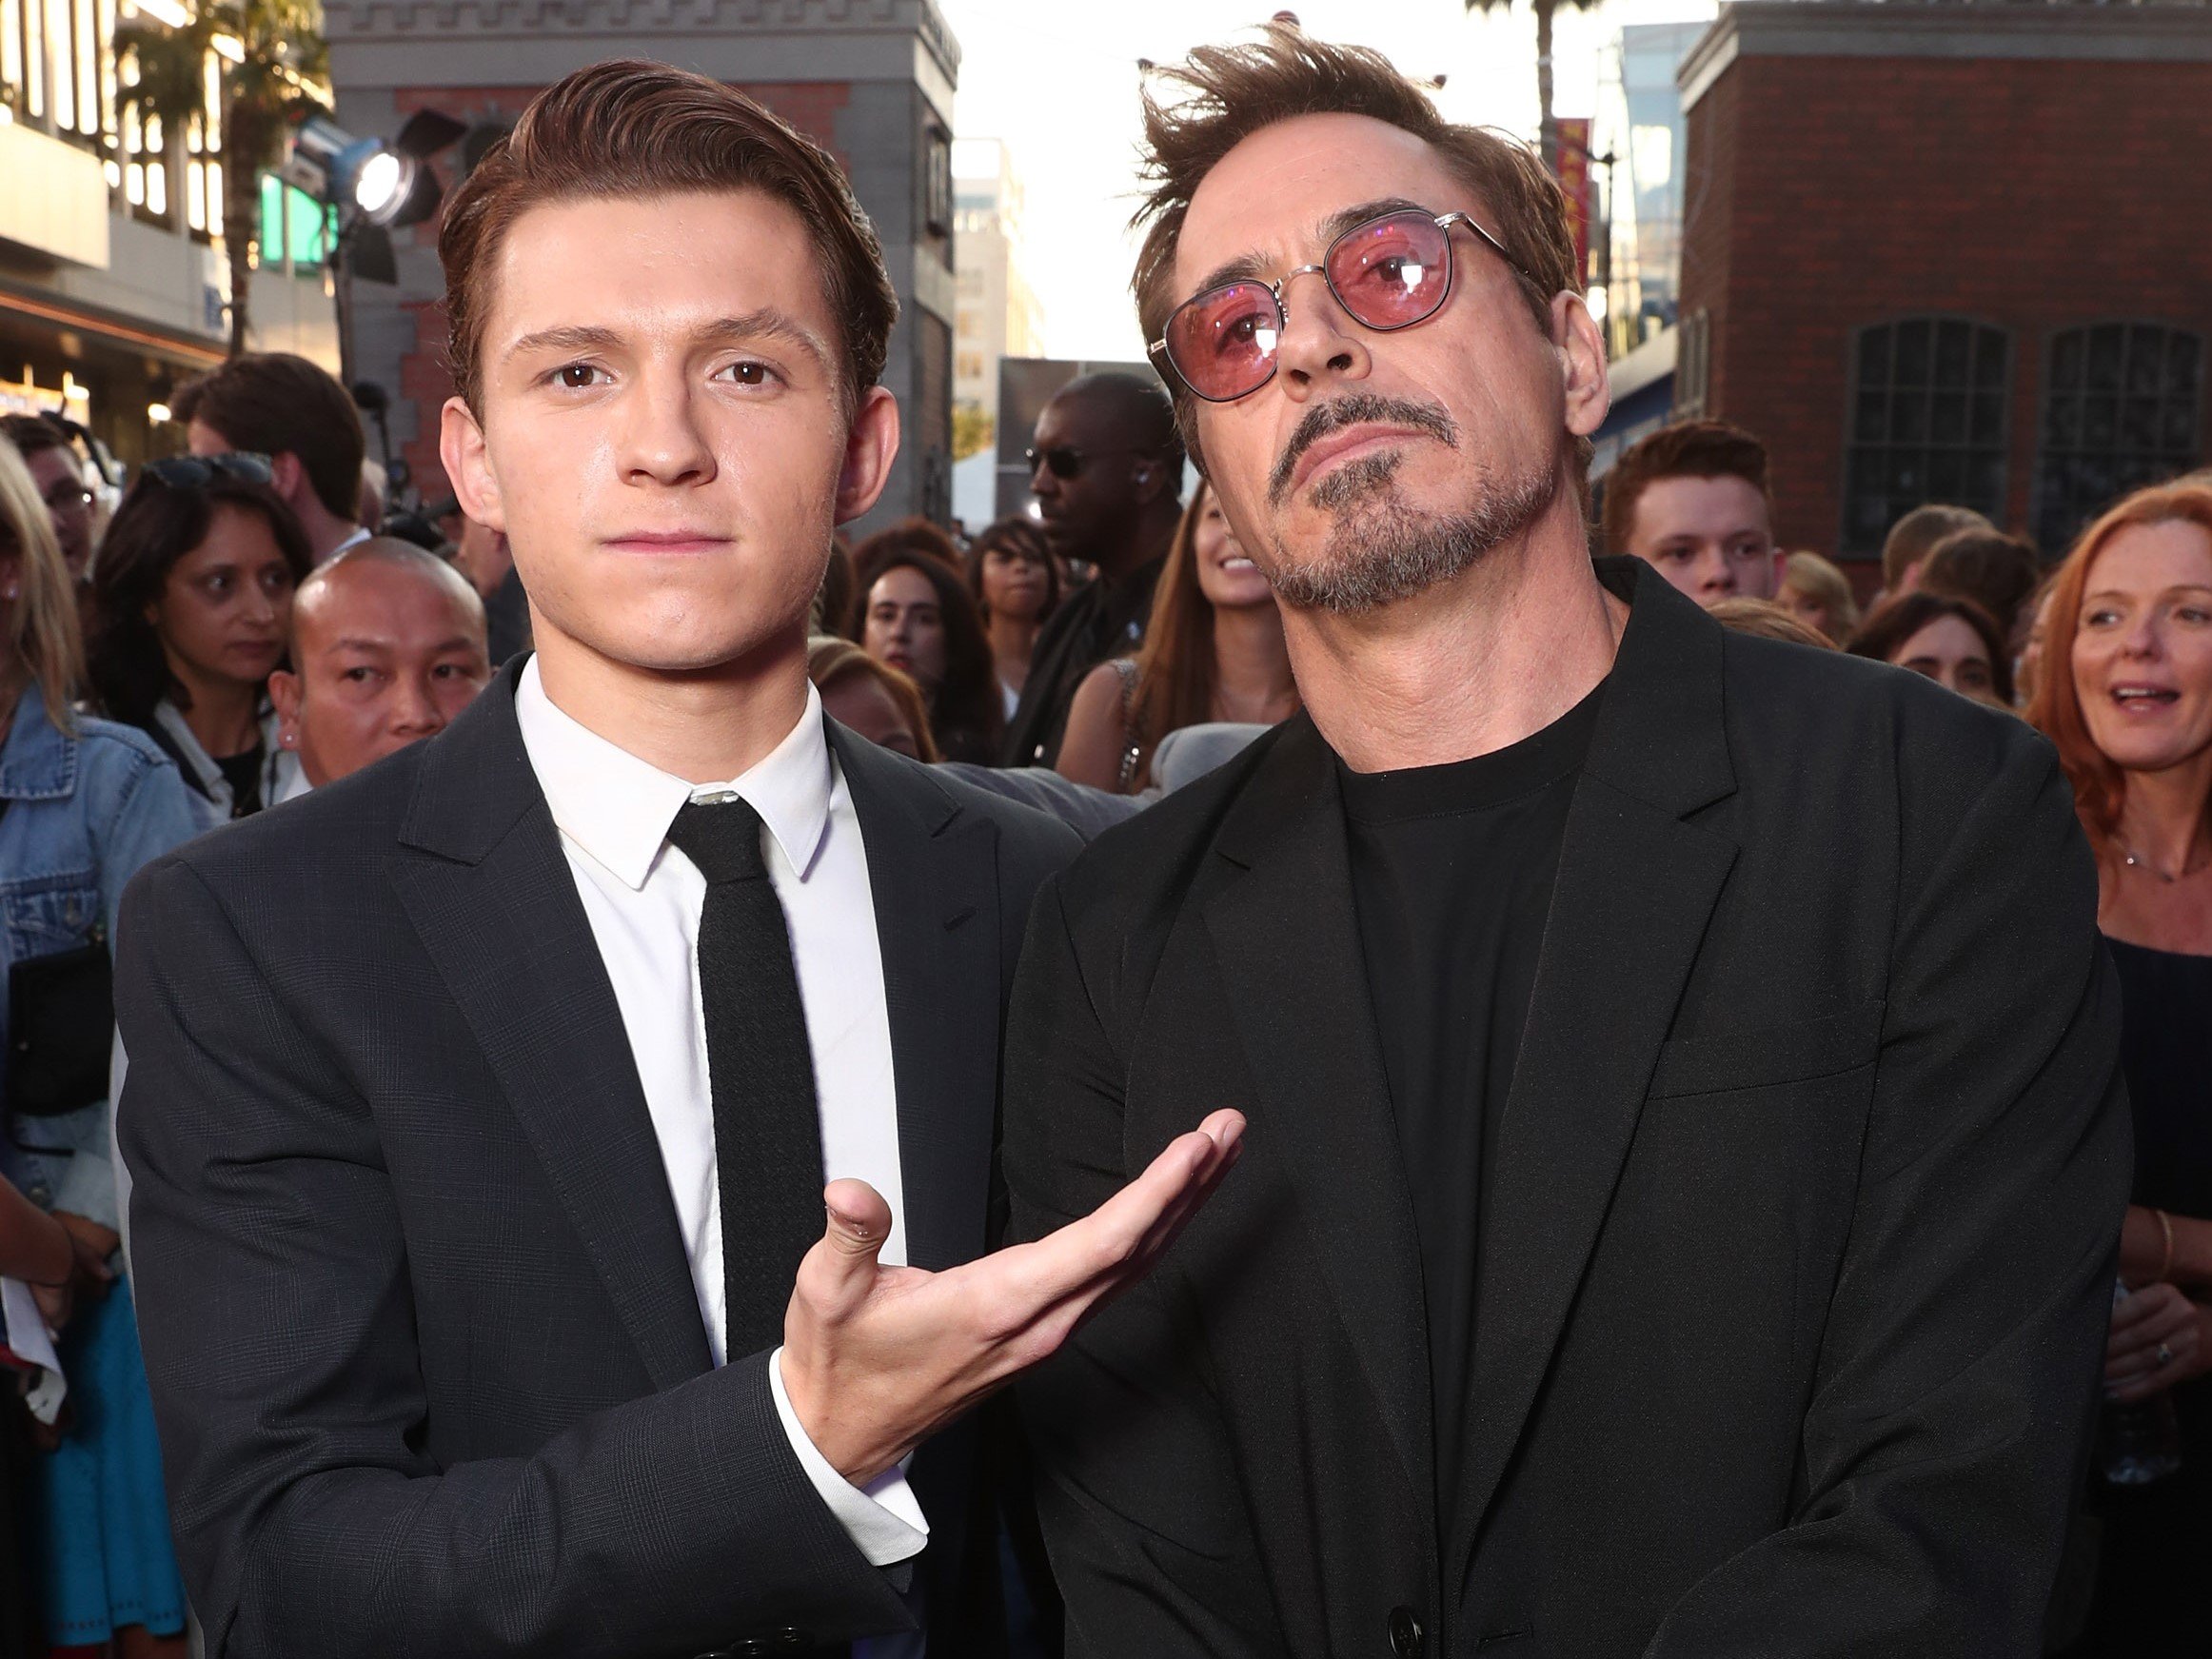 'Spider-Man' stars Tom Holland and Robert Downey Jr. pose for a picture. Holland wears a black suit over a white shirt and black tie. Downey Jr. wears a black suit over a black shirt and red-tinted glasses.